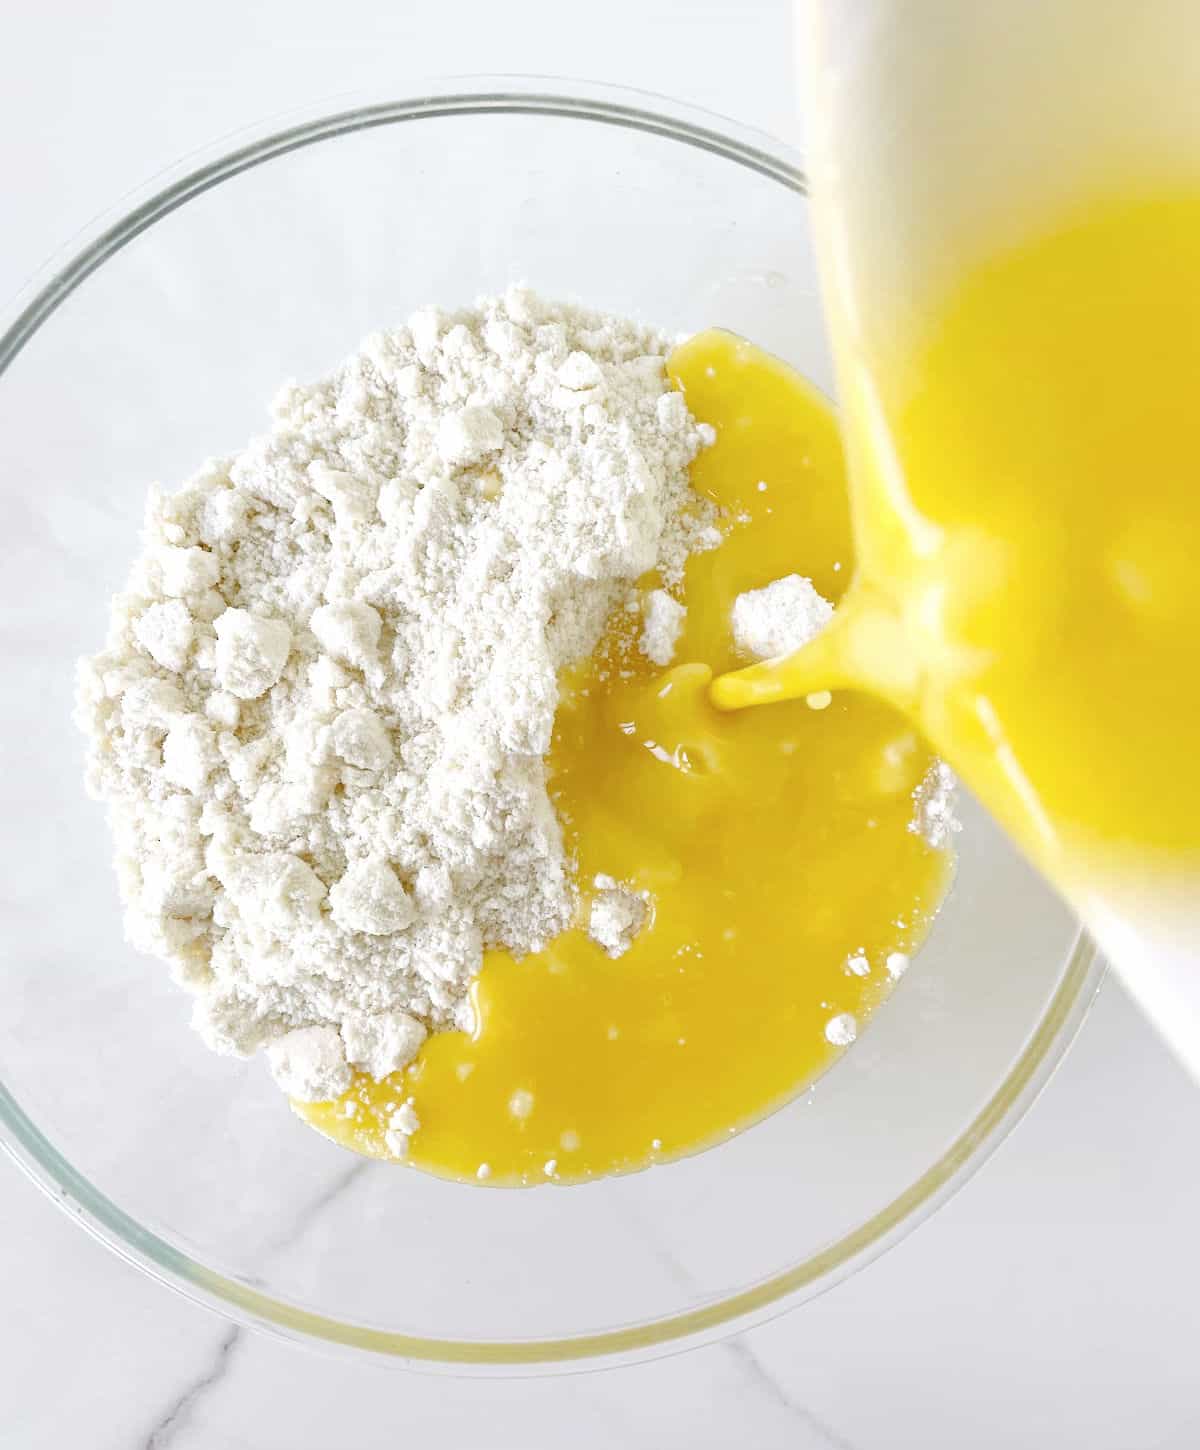 Adding melted butter to white cake mix in a glass bowl on a white marble surface.